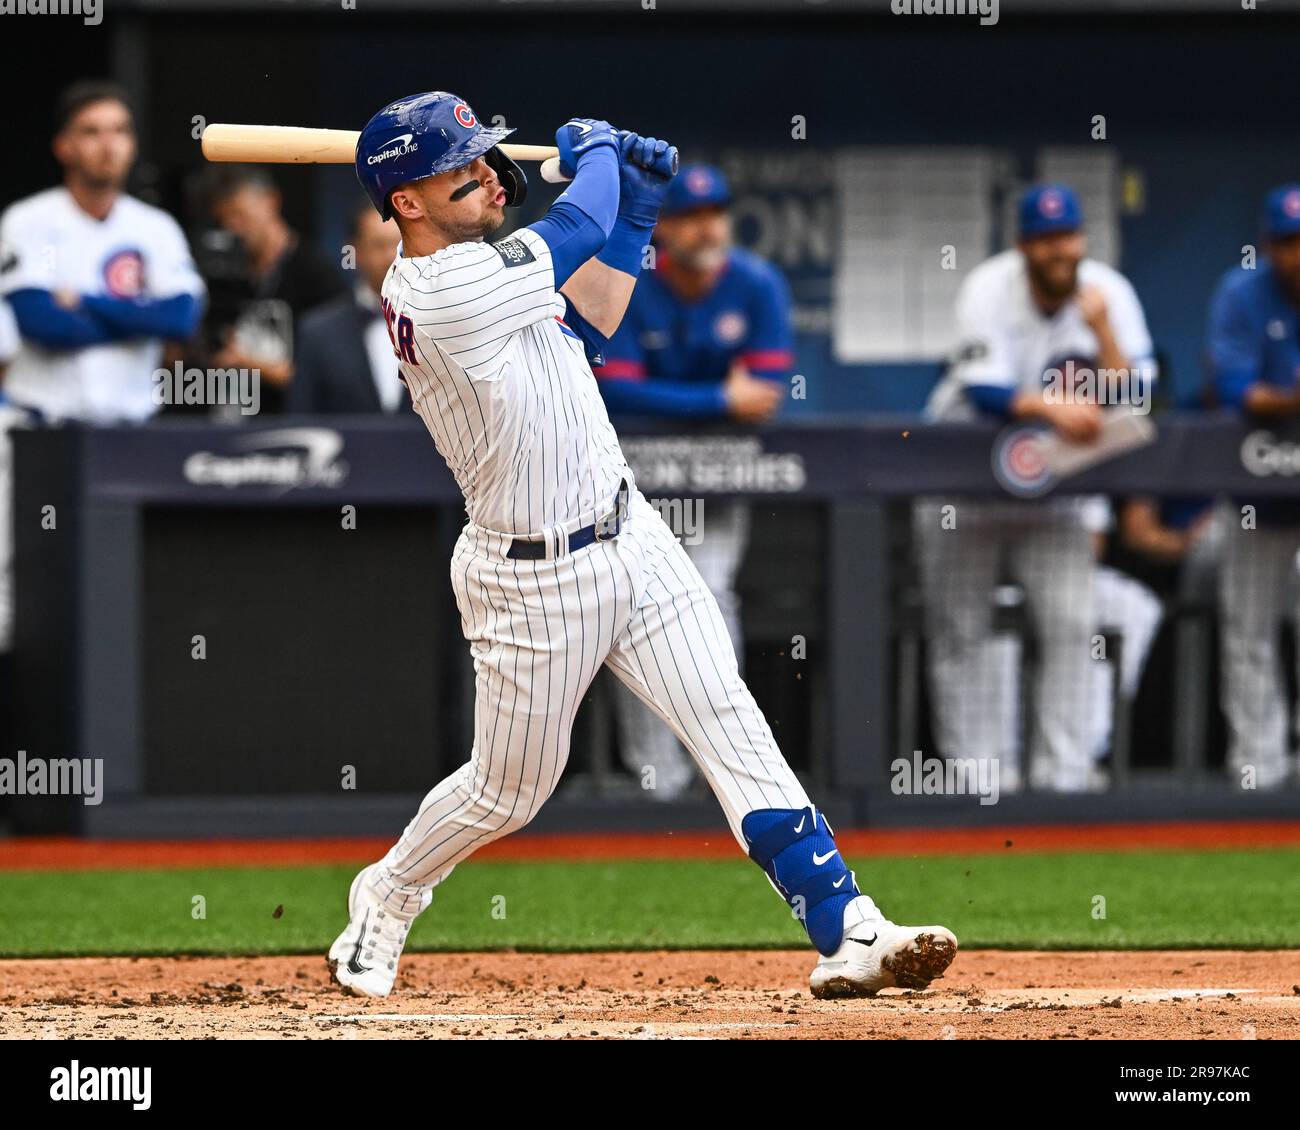 Nico Hoerner #2 of the Chicago Cubs hits a high fly ball to center field during the 2023 MLB London Series match St. Louis Cardinals vs Chicago Cubs at London Stadium, London, United Kingdom, 24th June 2023 (Photo by Craig Thomas/News Images) in, on 6/24/2023. (Photo by Craig Thomas/News Images/Sipa USA) Credit: Sipa USA/Alamy Live News Stock Photo